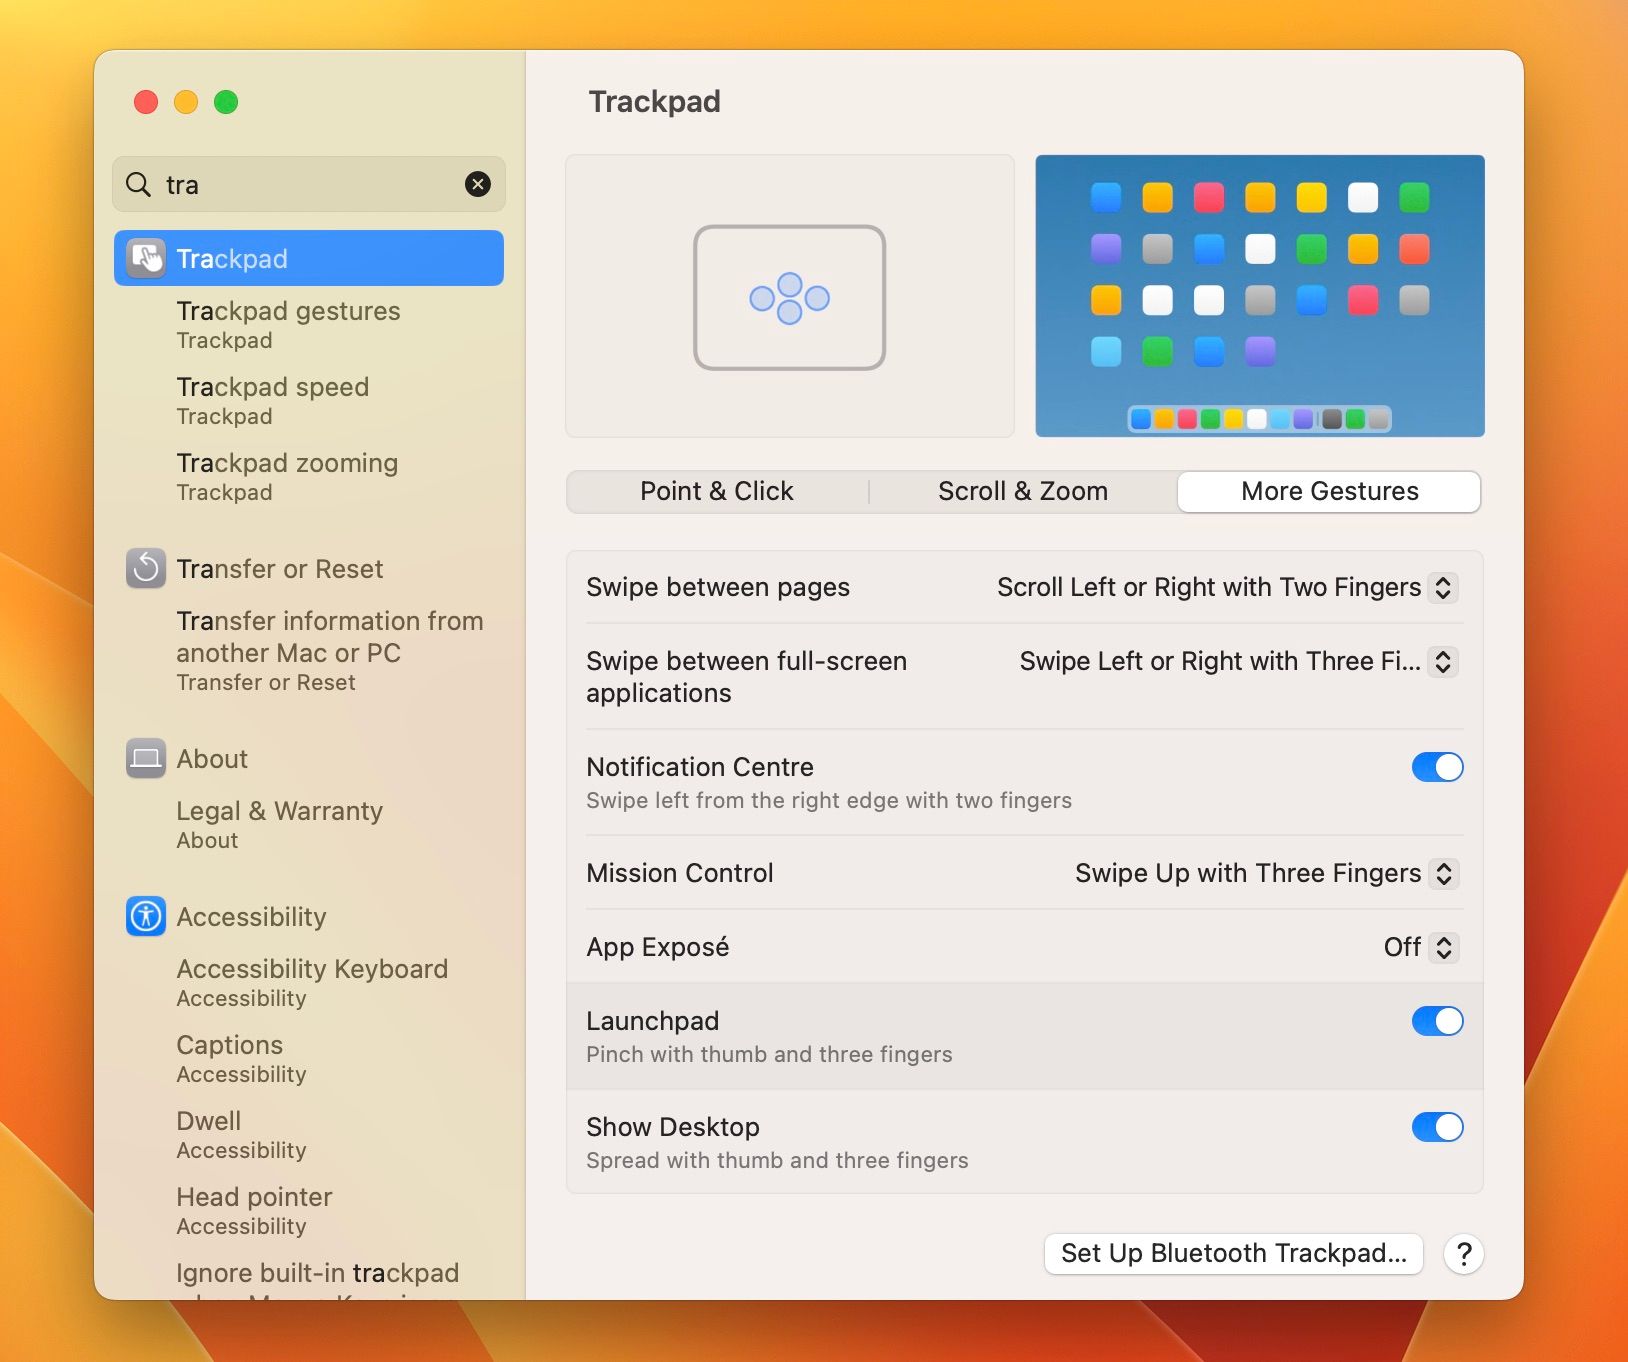 Trackpad gestures to open launchpad